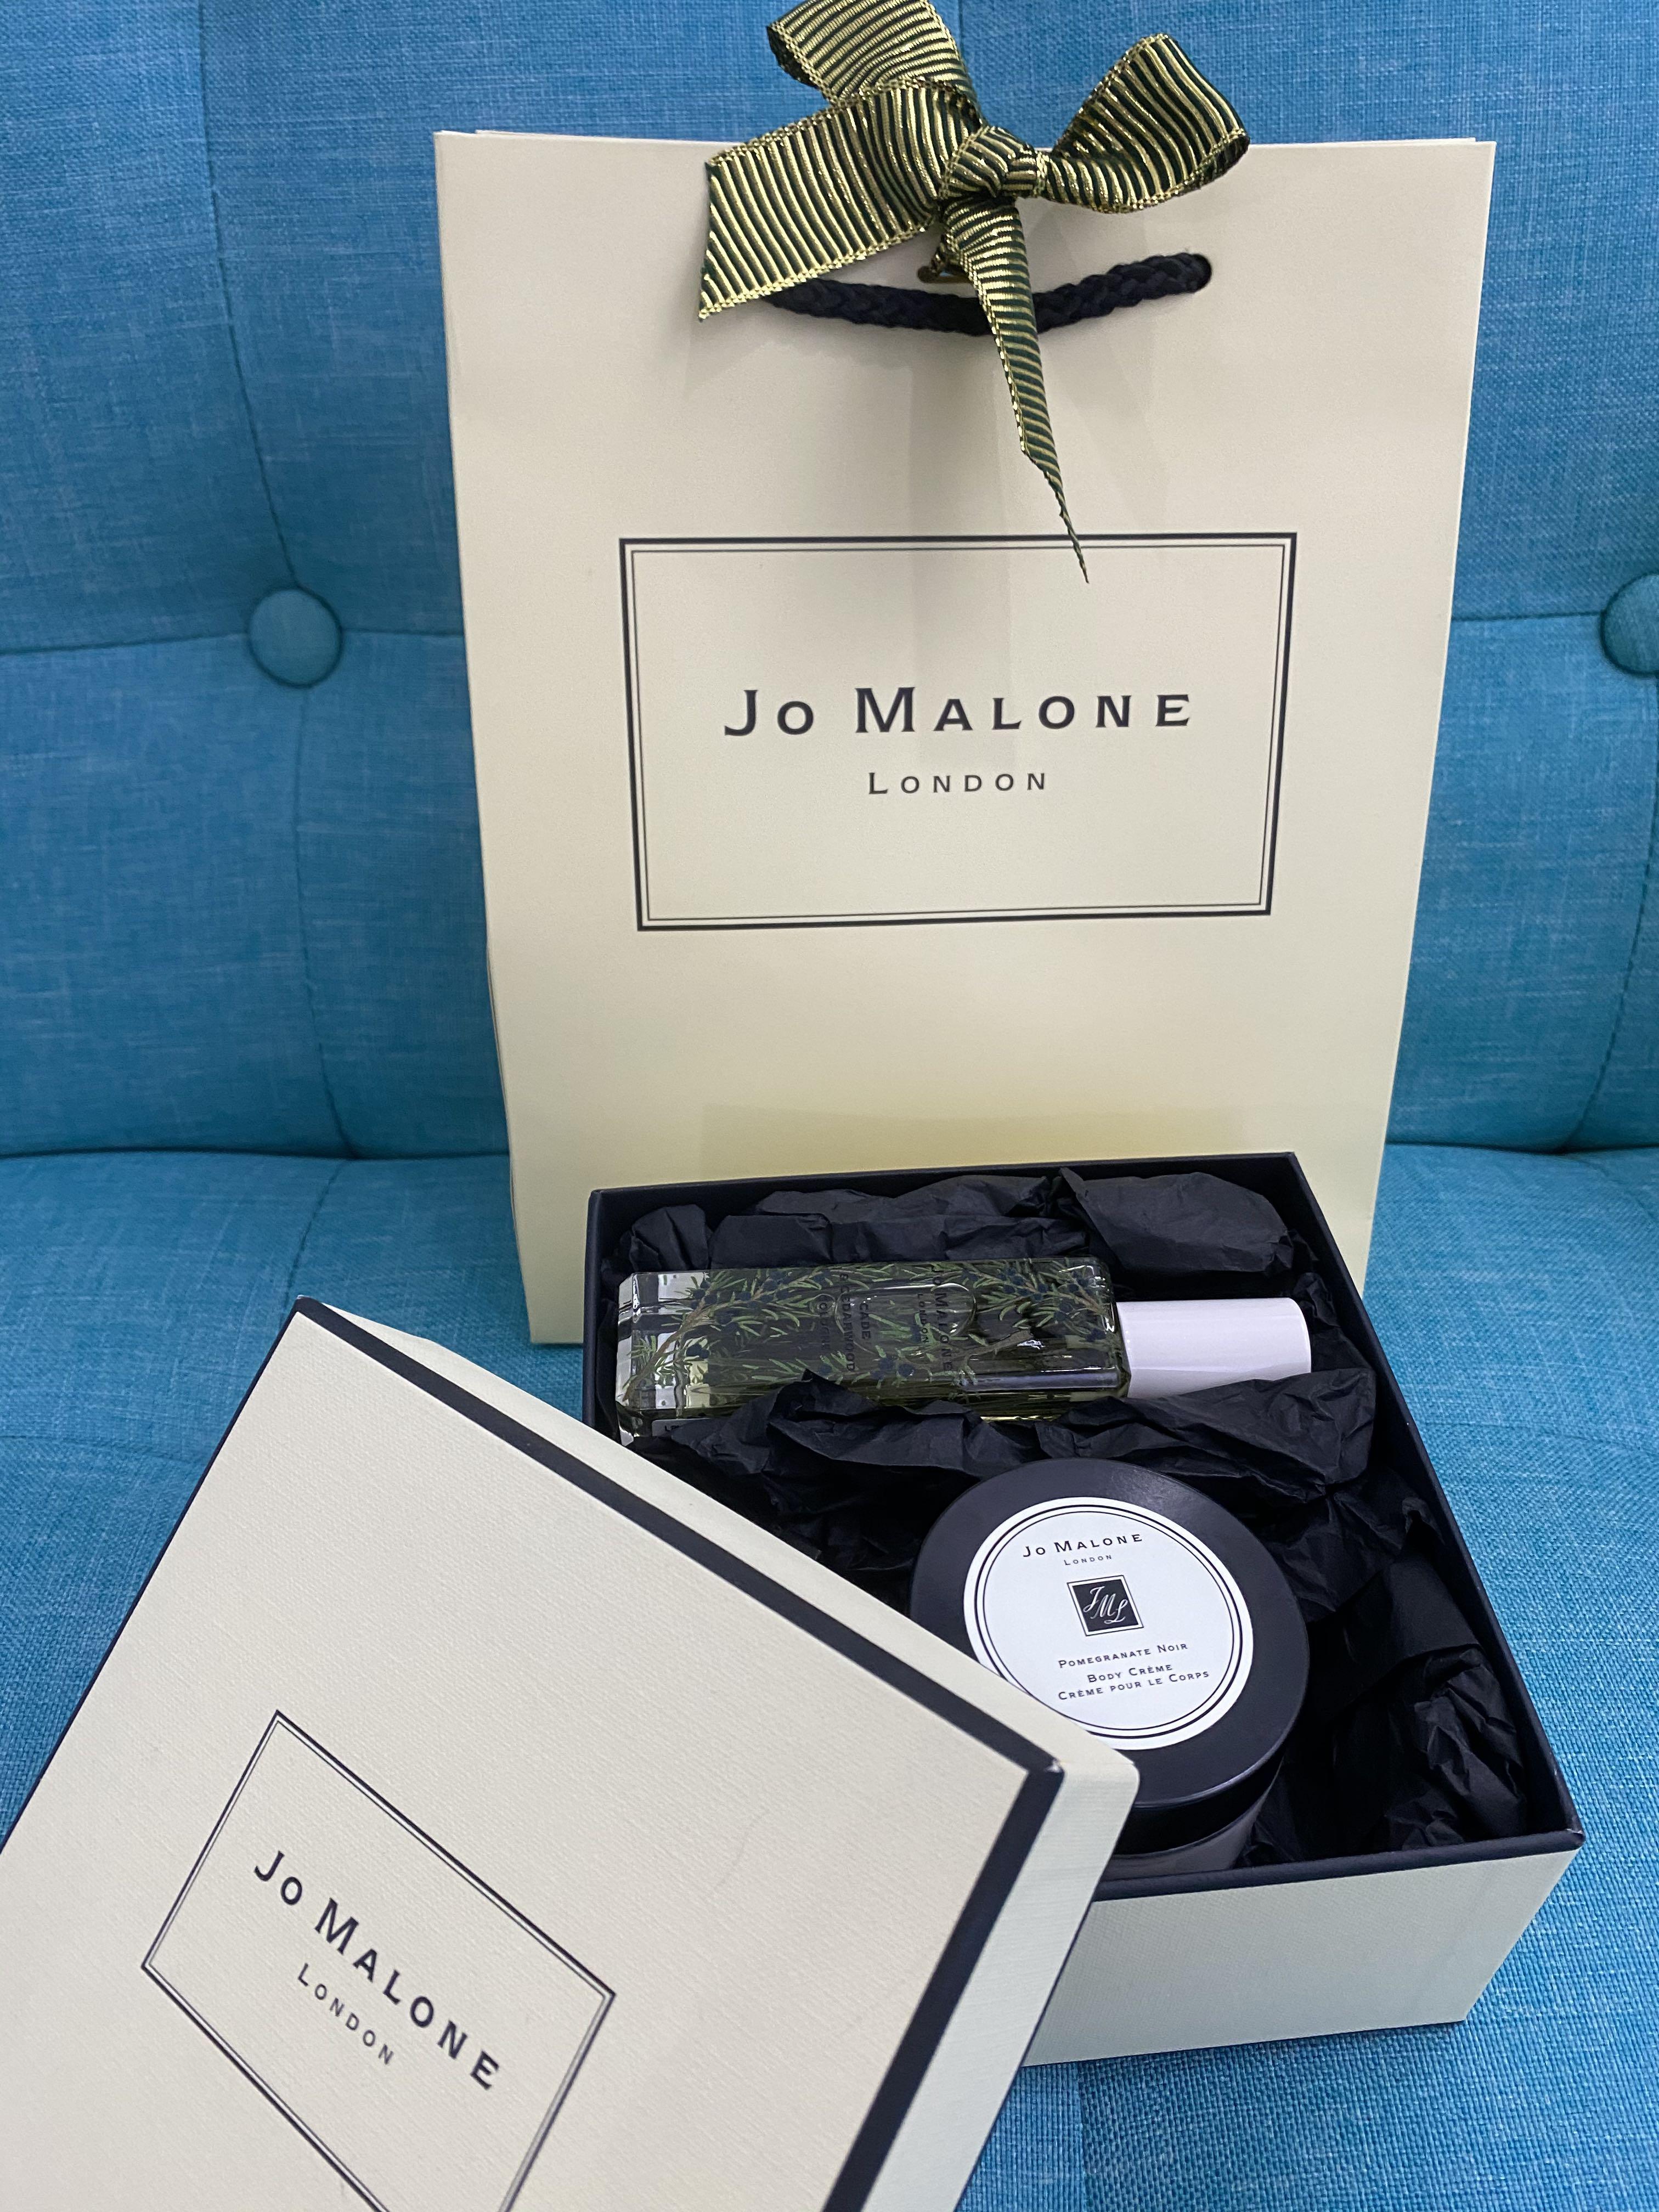 GENUINE "JO MALONE"  GIFT BOXES IN TRADITIONAL CREAM & BLACK WITH TISSUE PAPER 